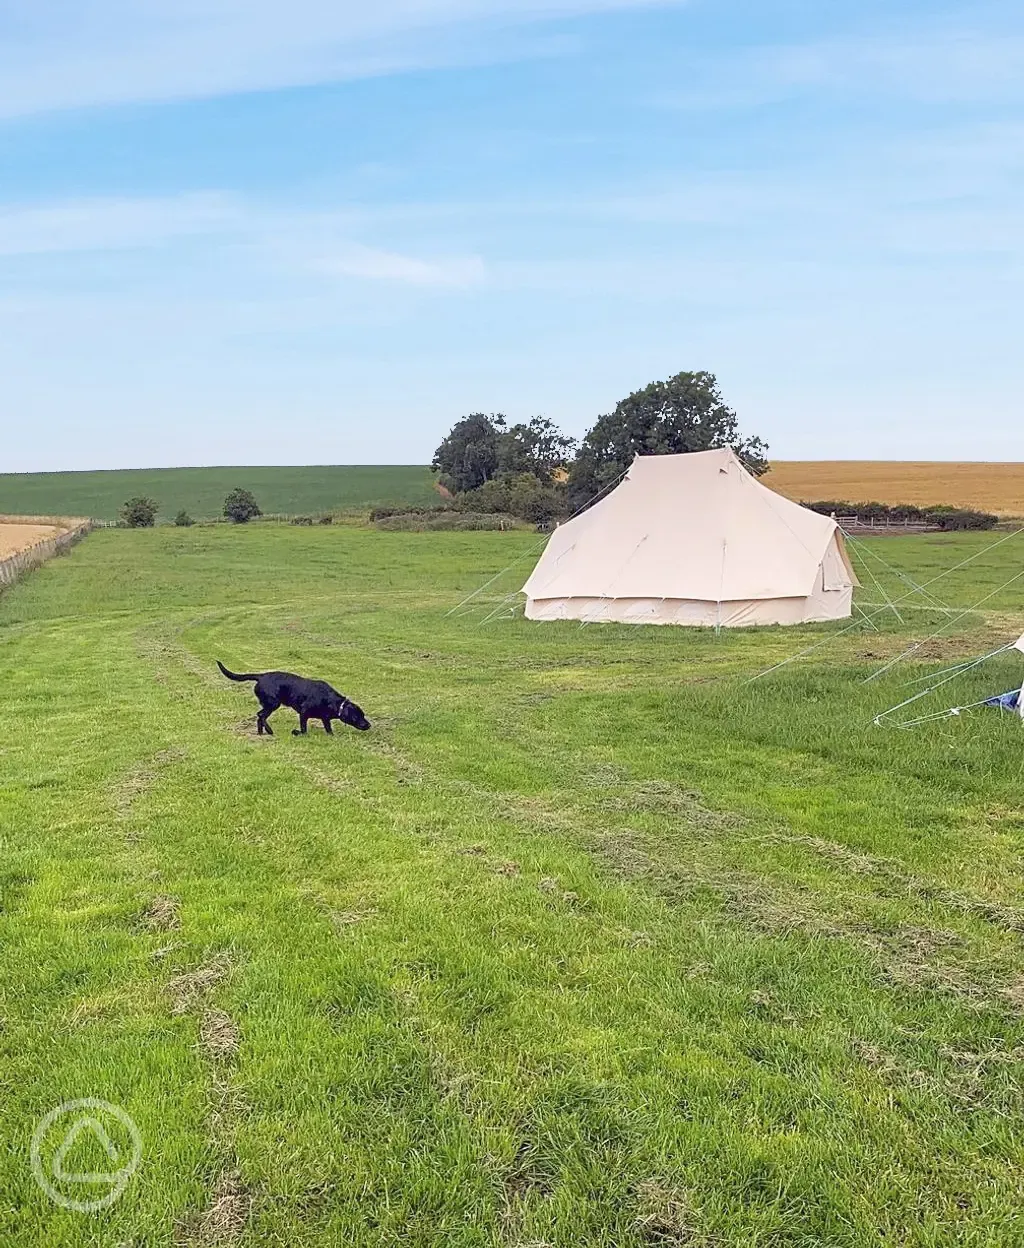 Bell tent on field with dog